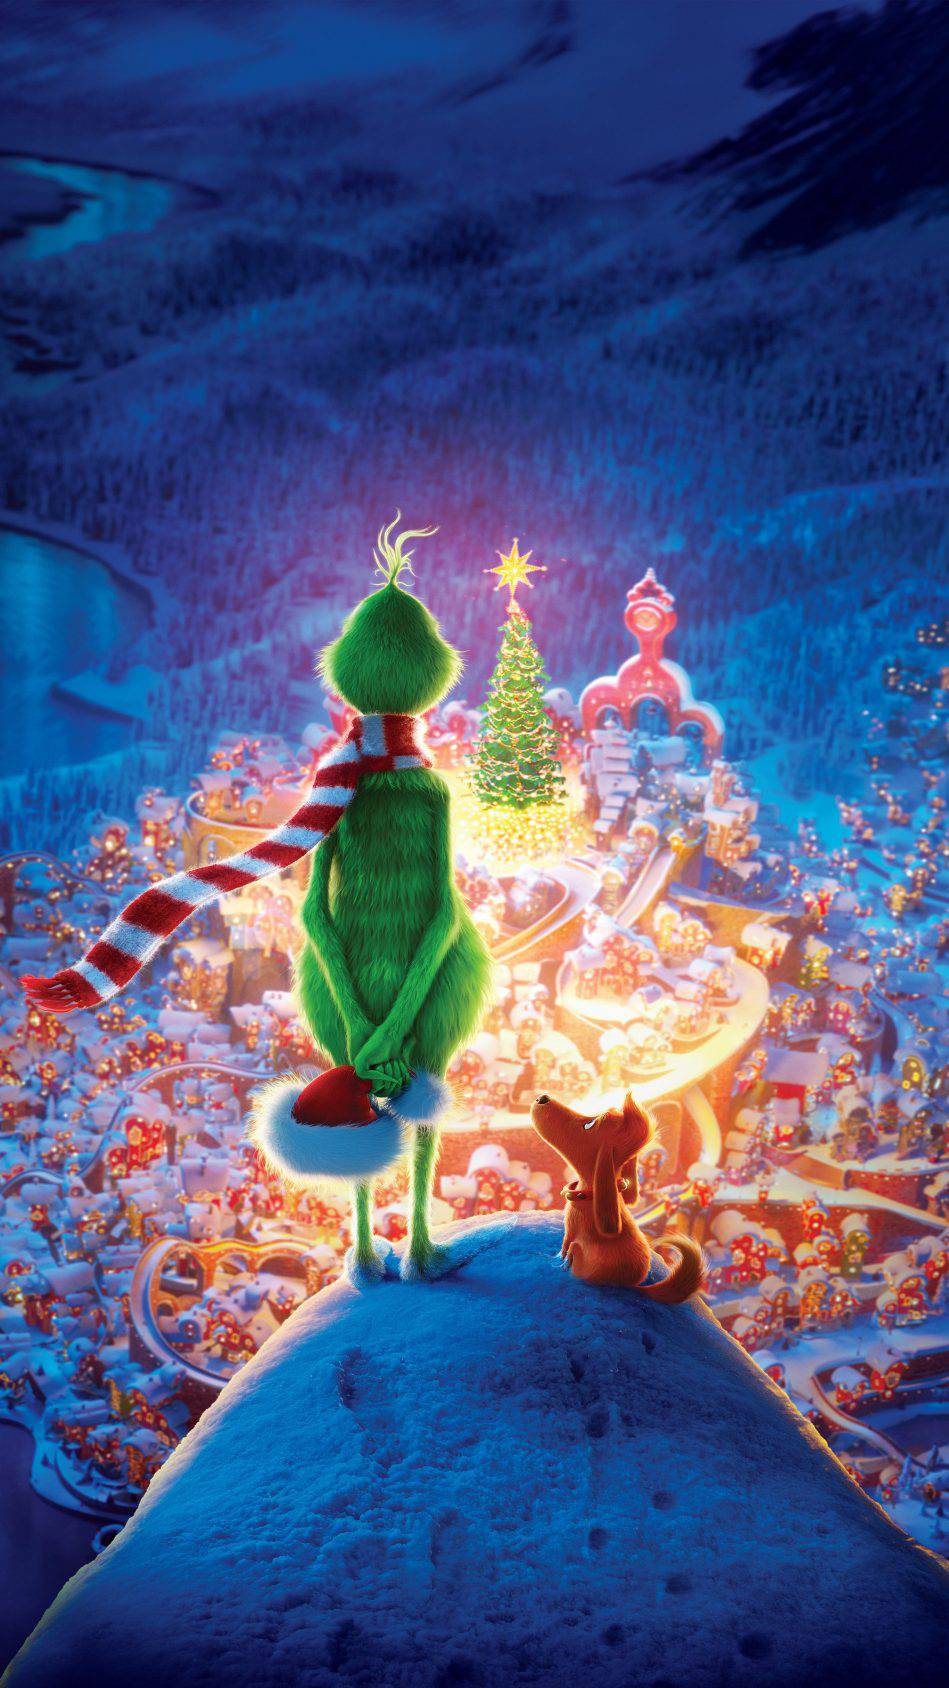 The Grinch Christmas IPhone Wallpaper - IPhone Wallpapers : iPhone  Wallpapers